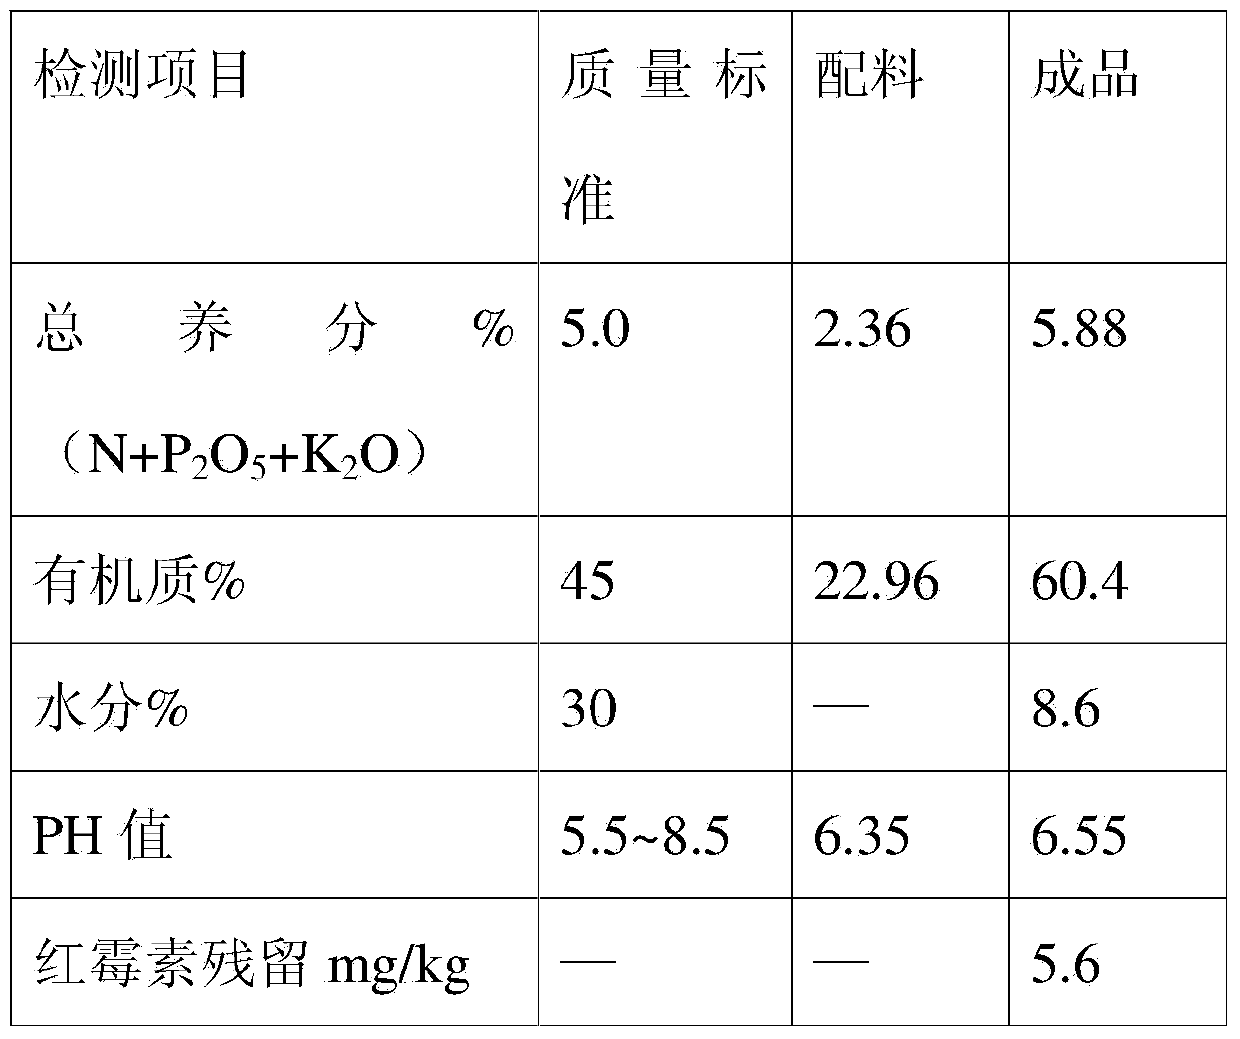 Method for producing organic fertilizer by using erythromycin waste residue and tetracycline urea double salt mother liquor